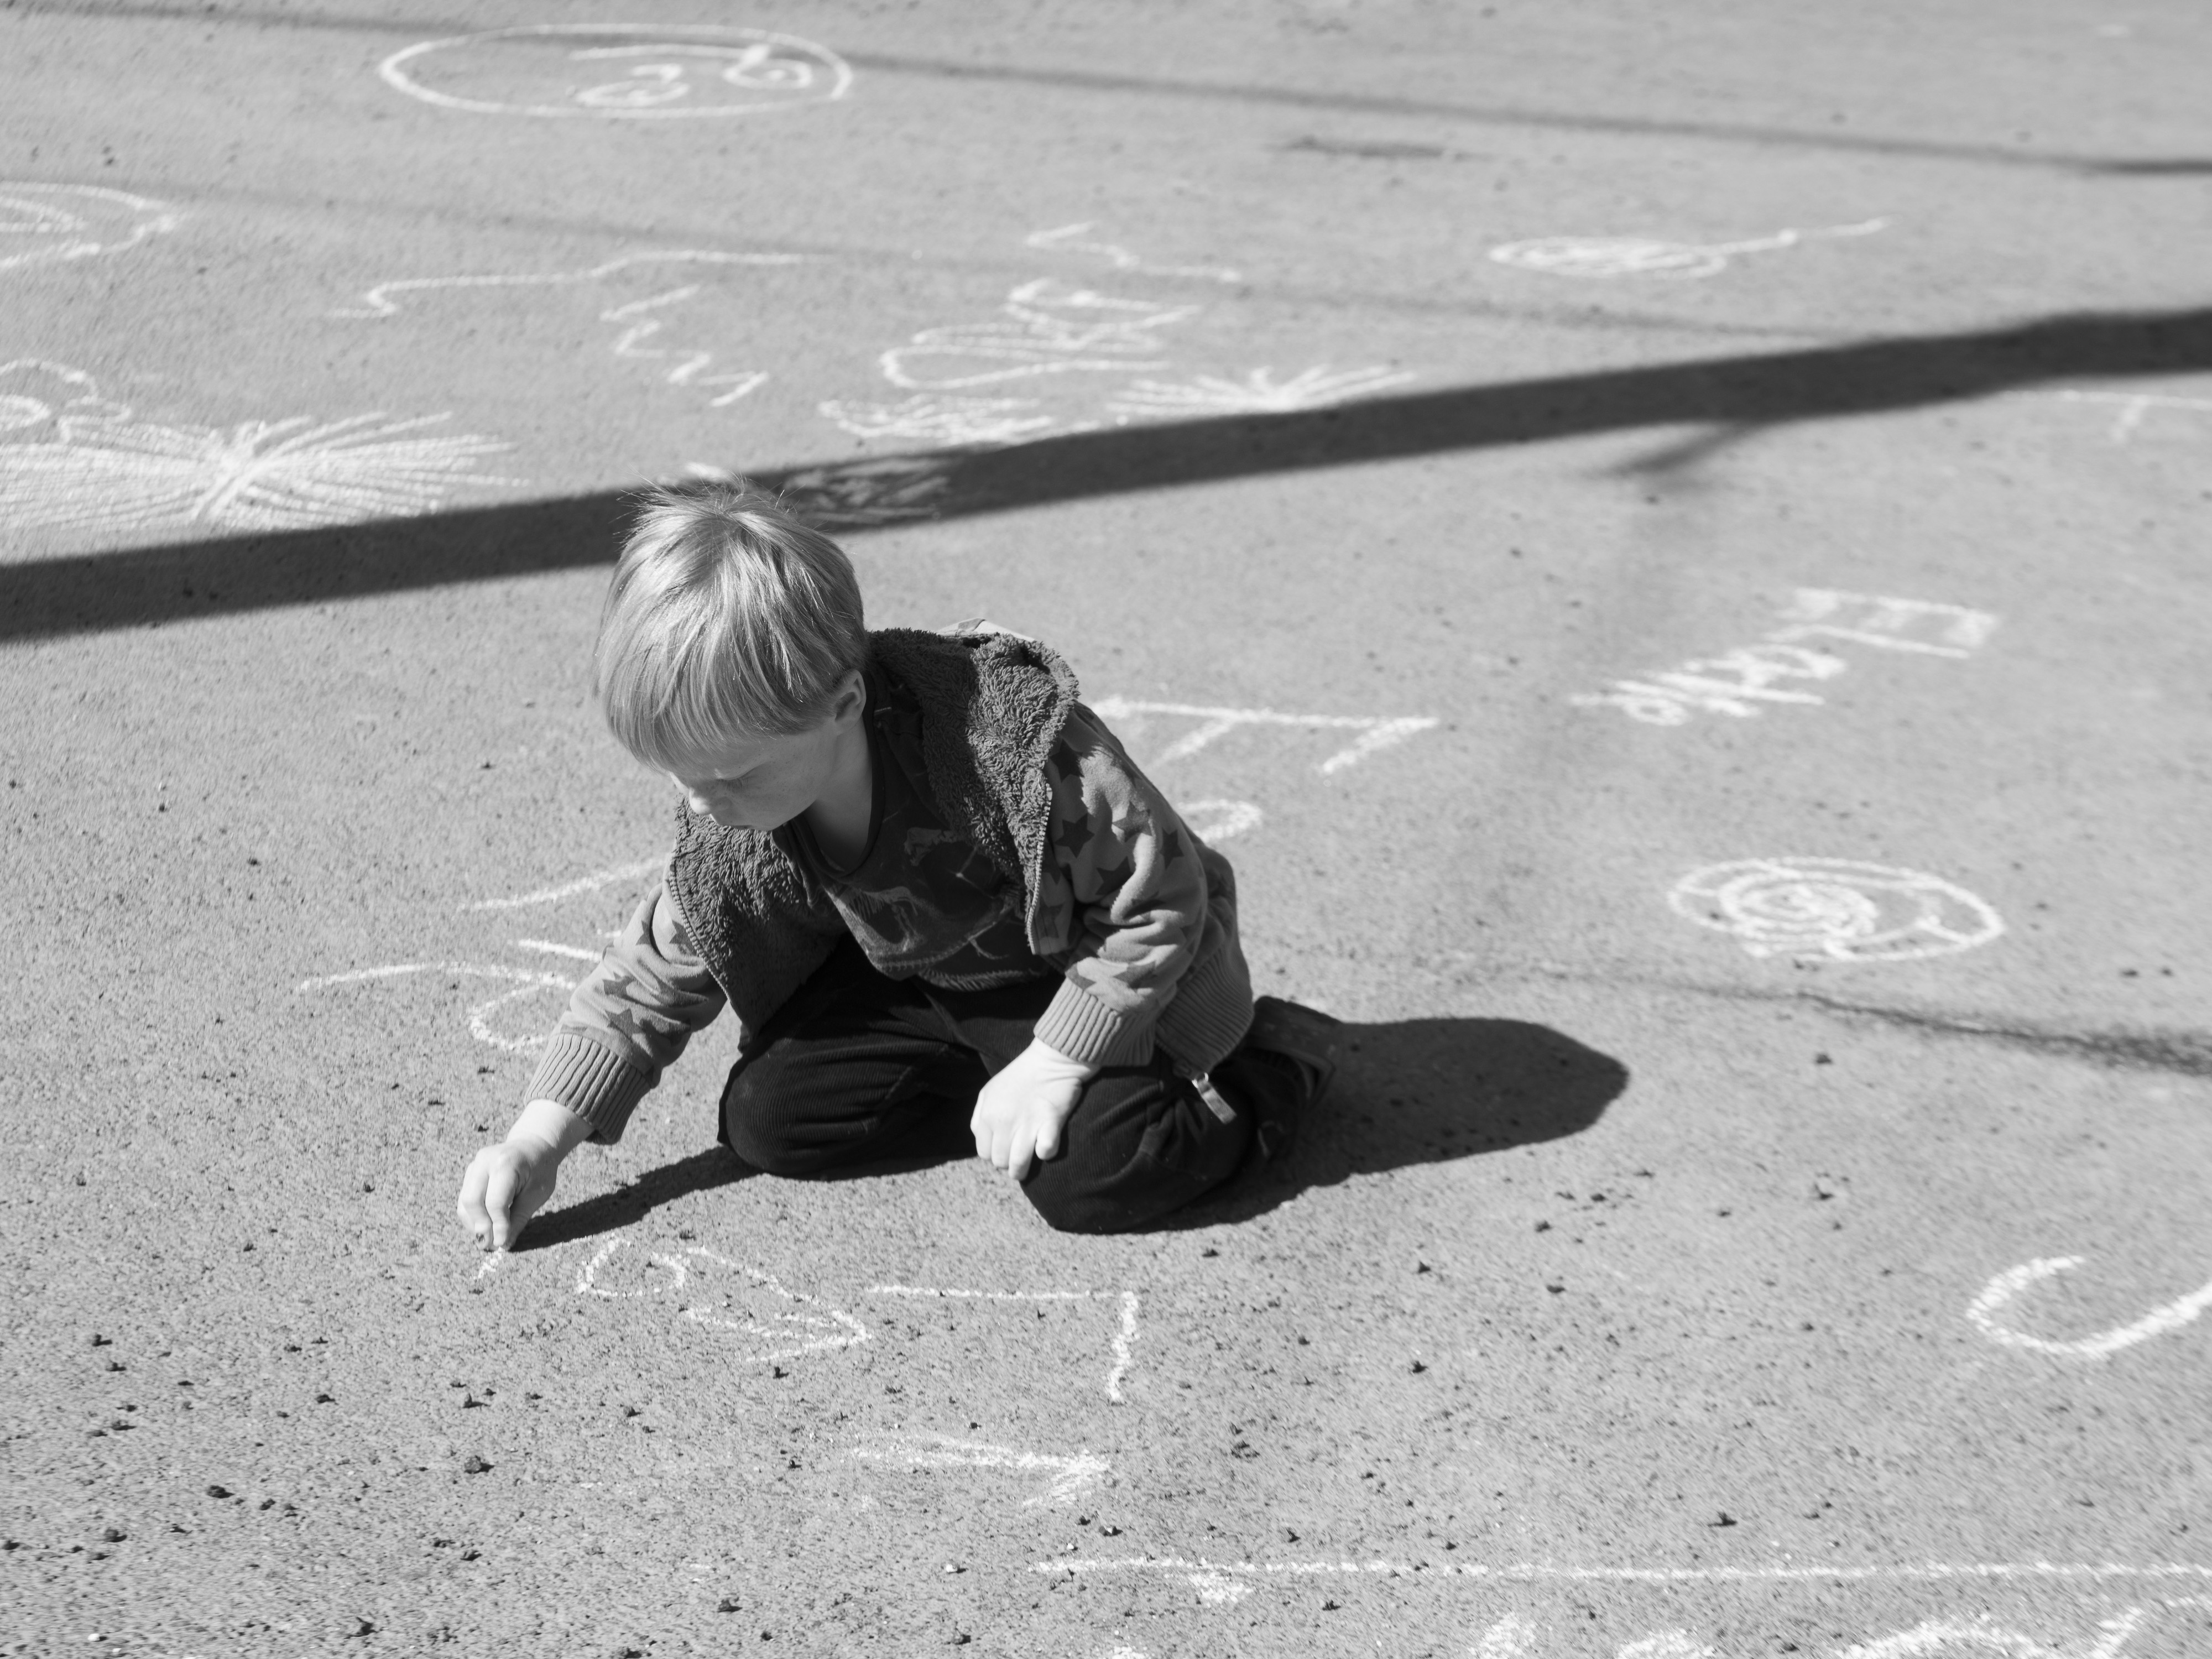 Chalking the road 3